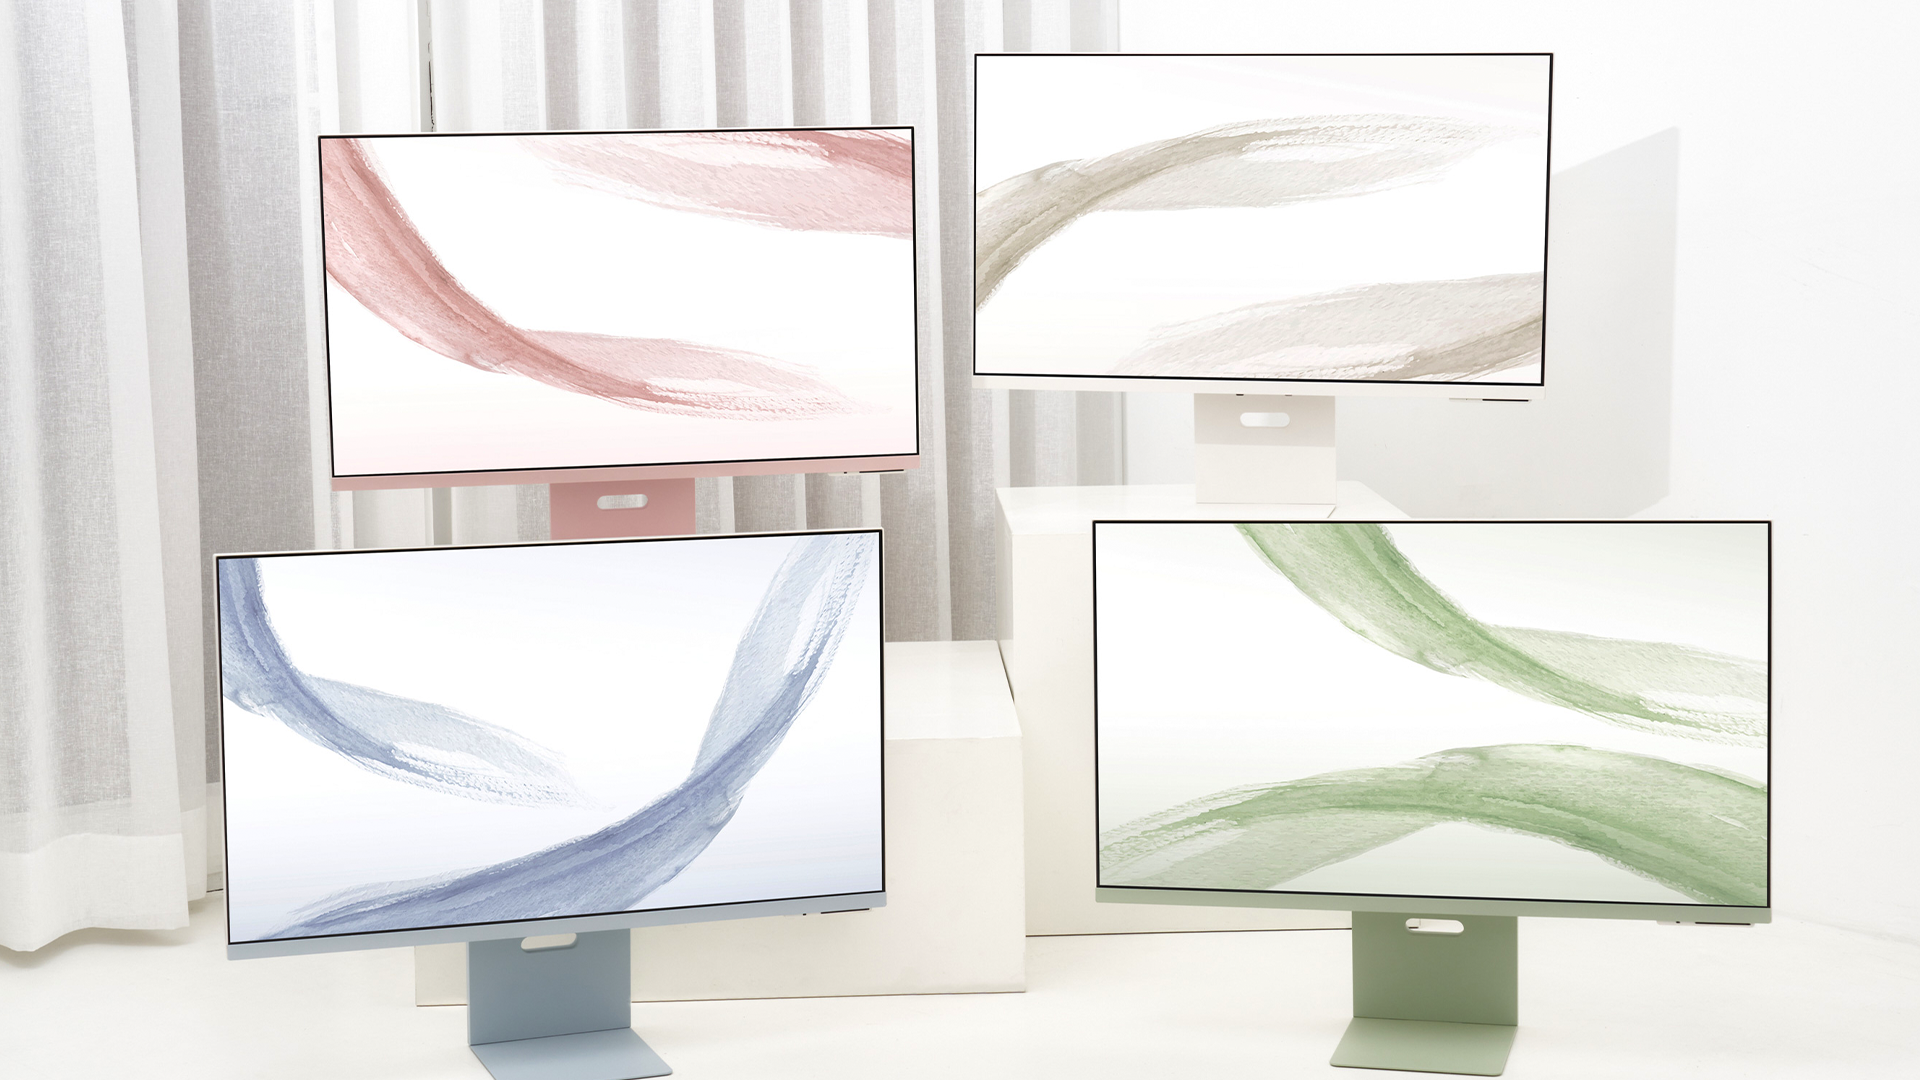 The Smart Monitor M8 in green, white, pink, and blue.